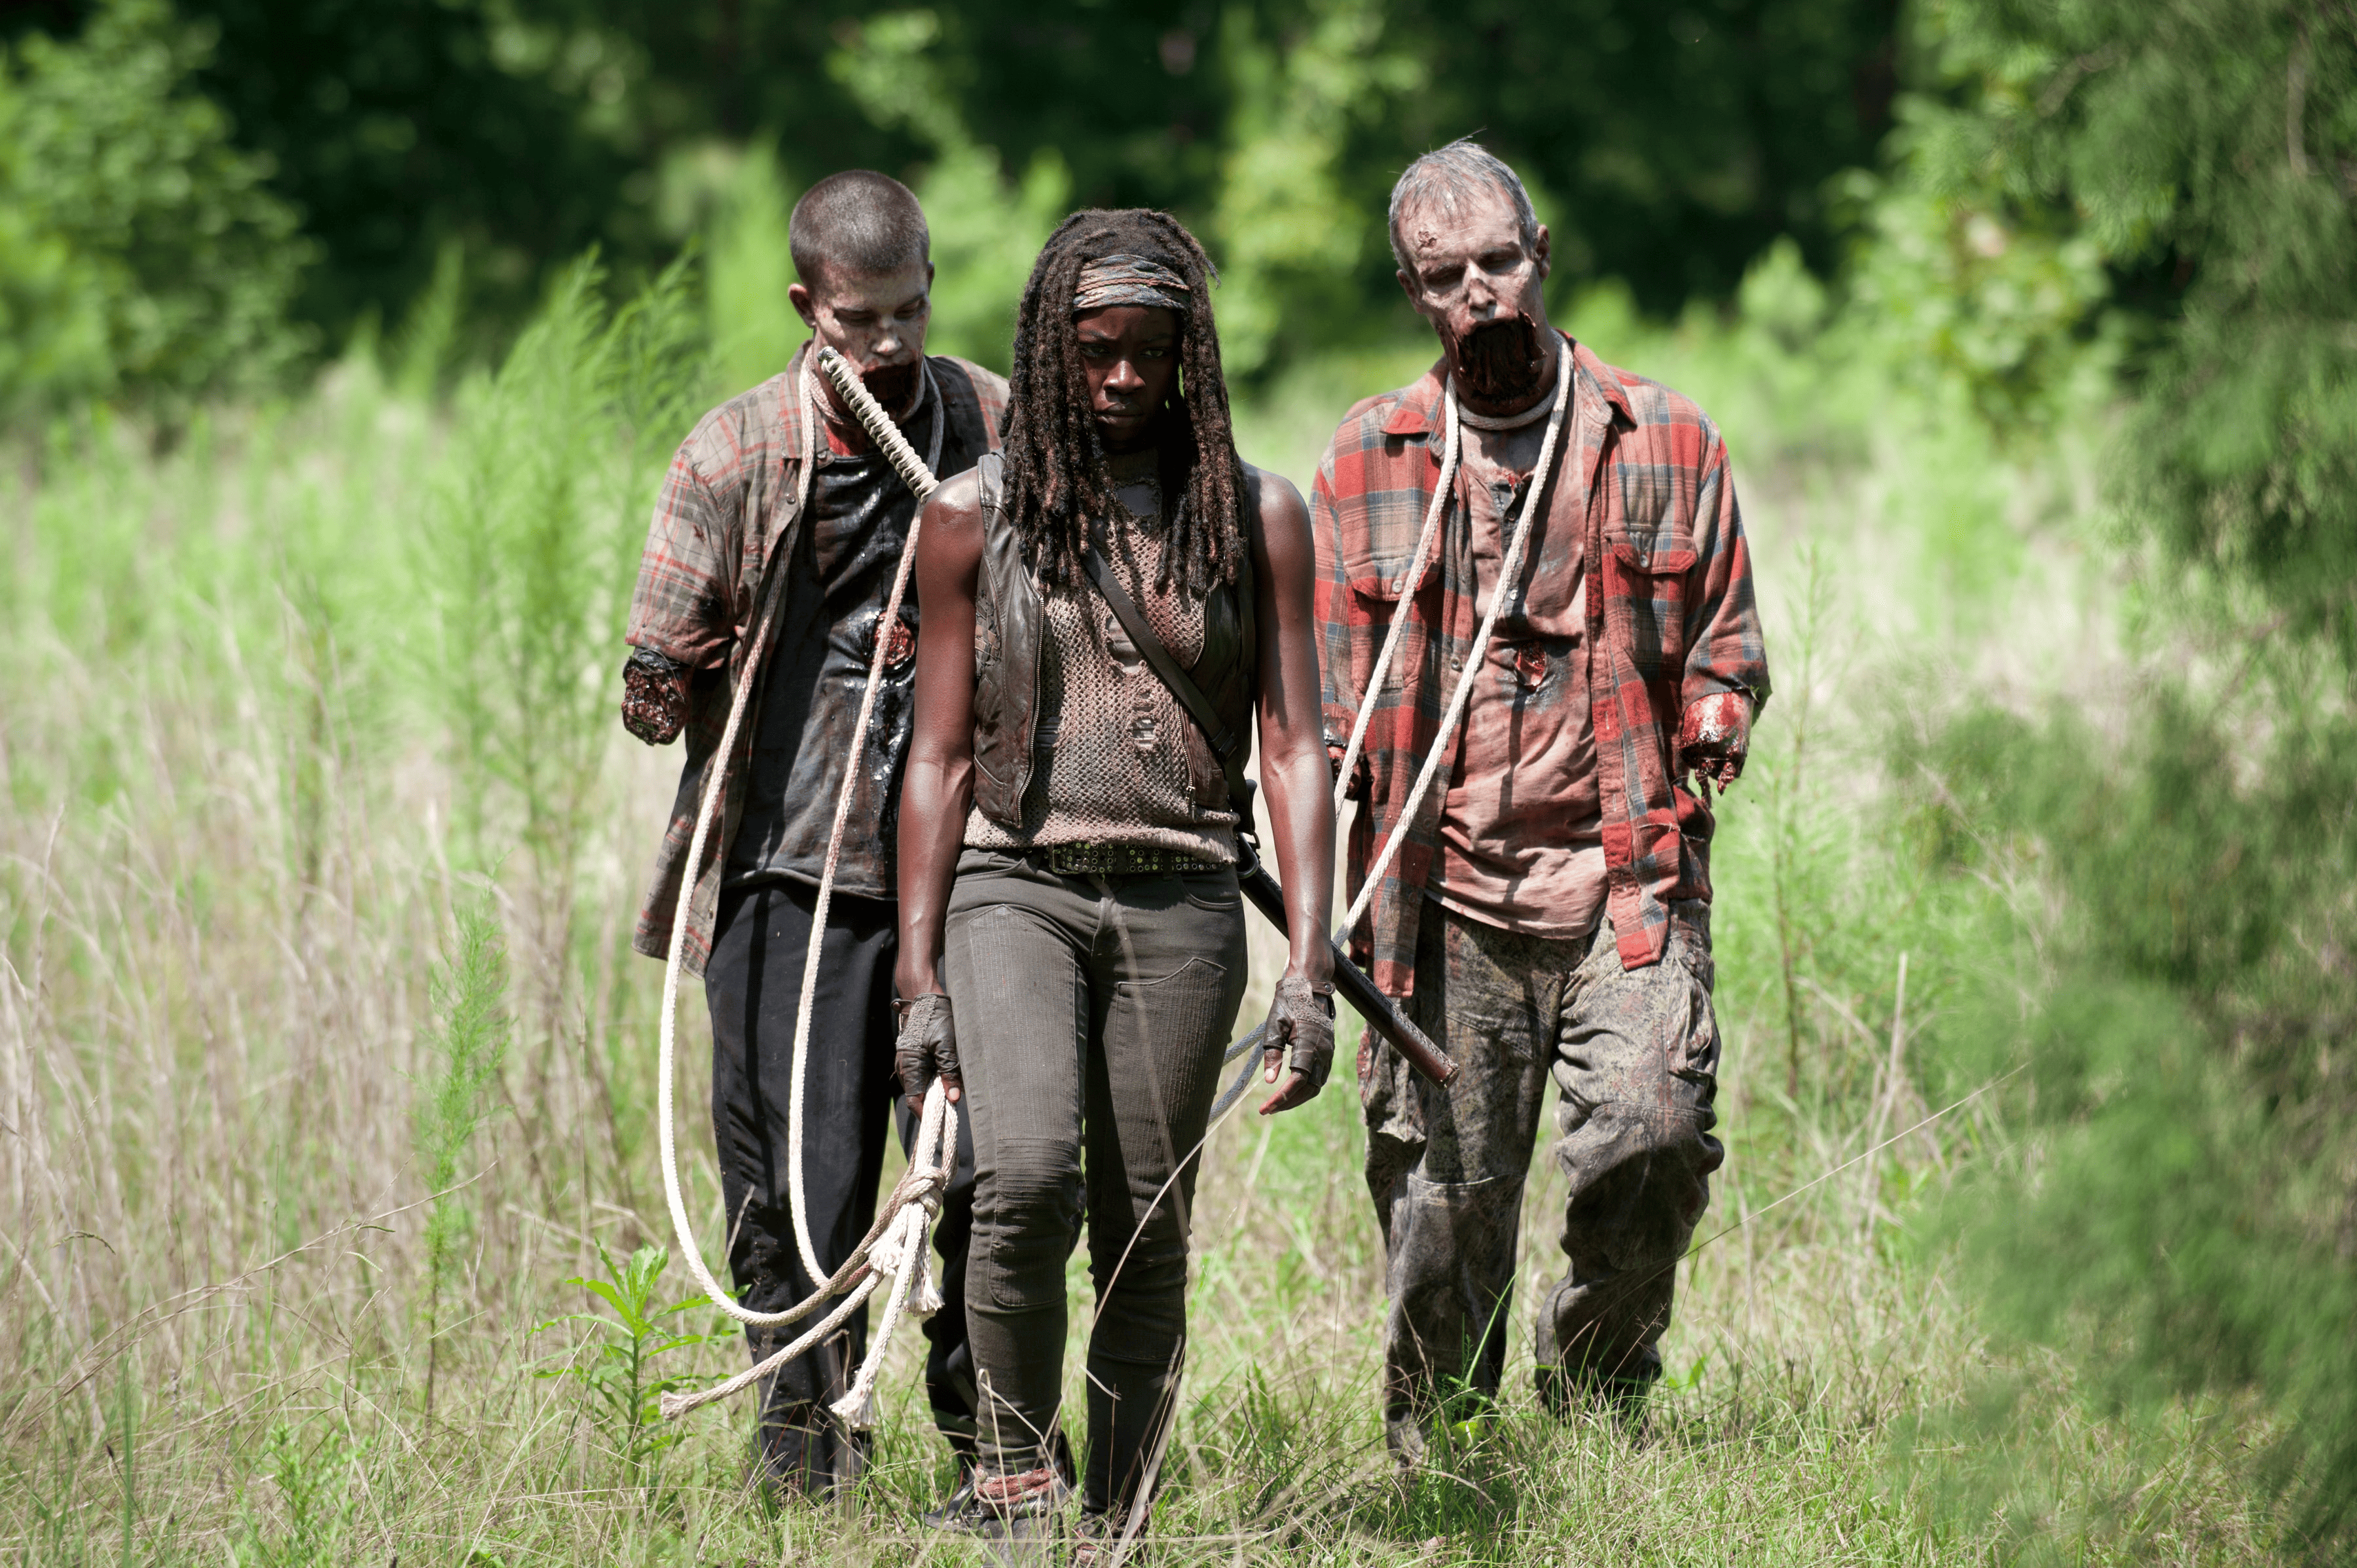 http://img2.wikia.nocookie.net/__cb20140125002317/walkingdead/images/f/f7/AMC_TWD_After.png